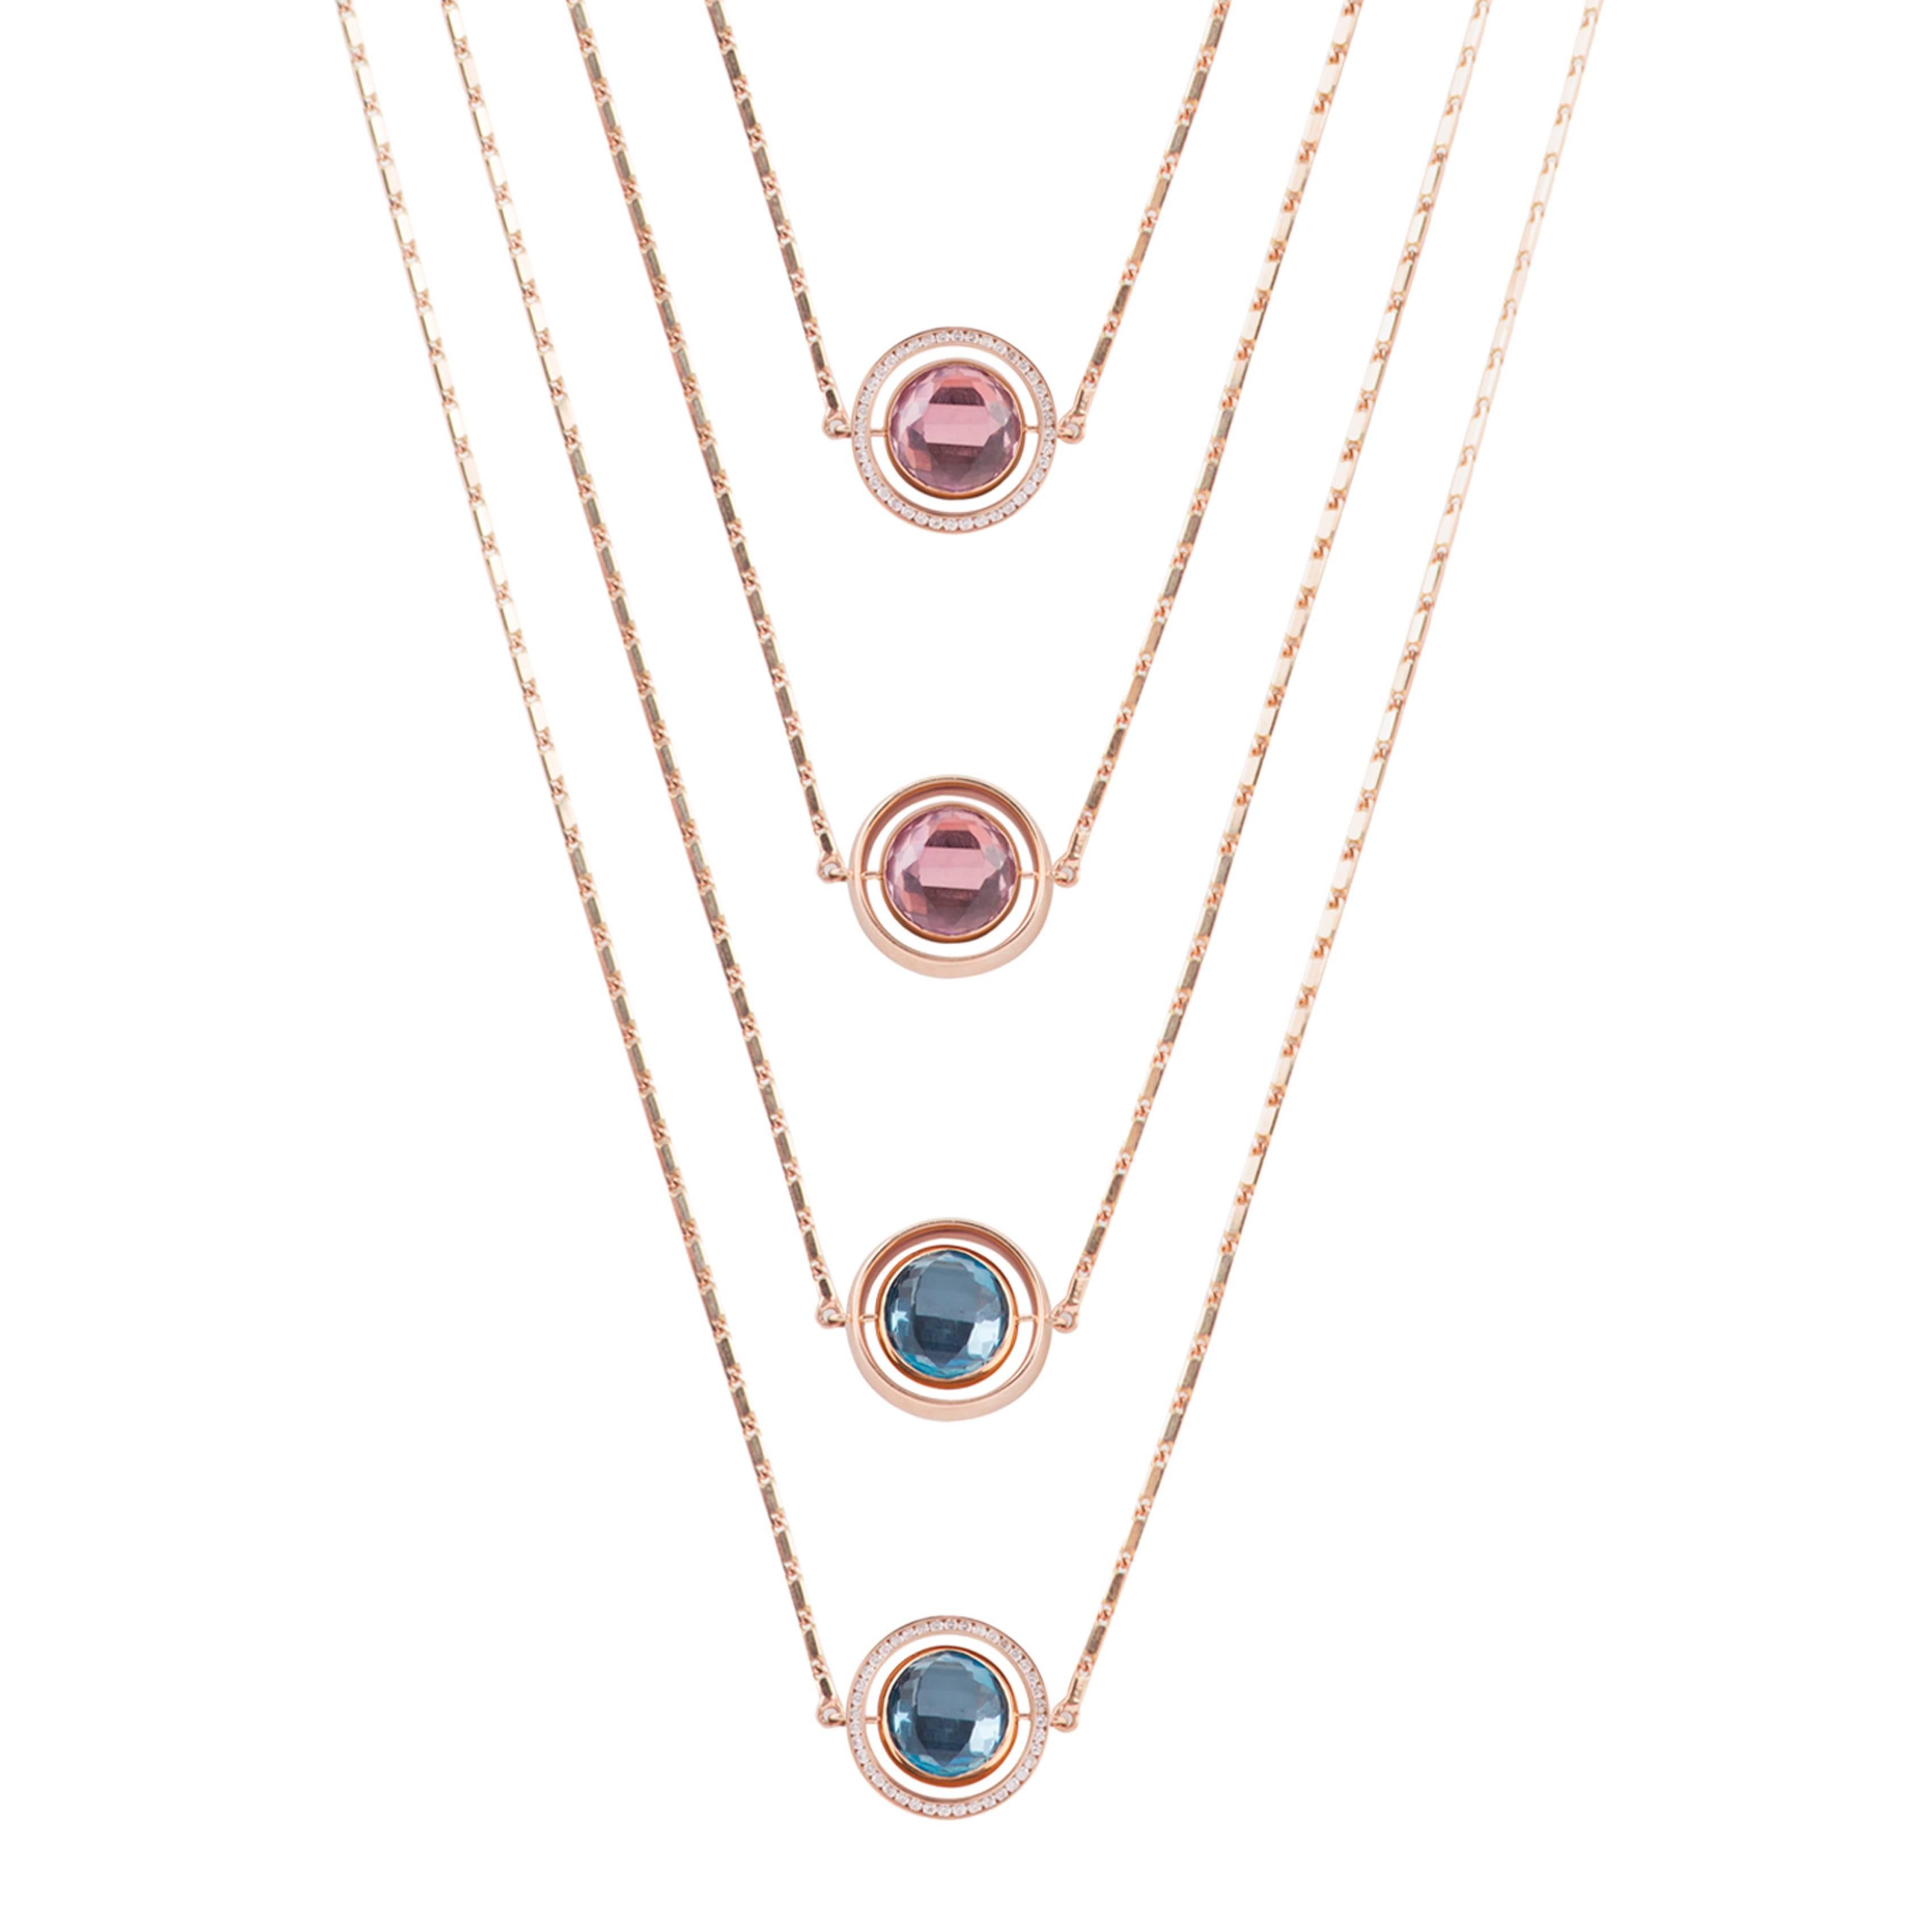 This Small Swiveling Necklace is designed by the French Jewelry brand Marie Mas. 
The necklace is in 18 Carat Pink Gold, with Diamonds, Pink Amethyst and London Blue Topaz. The center stone is reversible : there is an Pink Amethyst and a London Blue